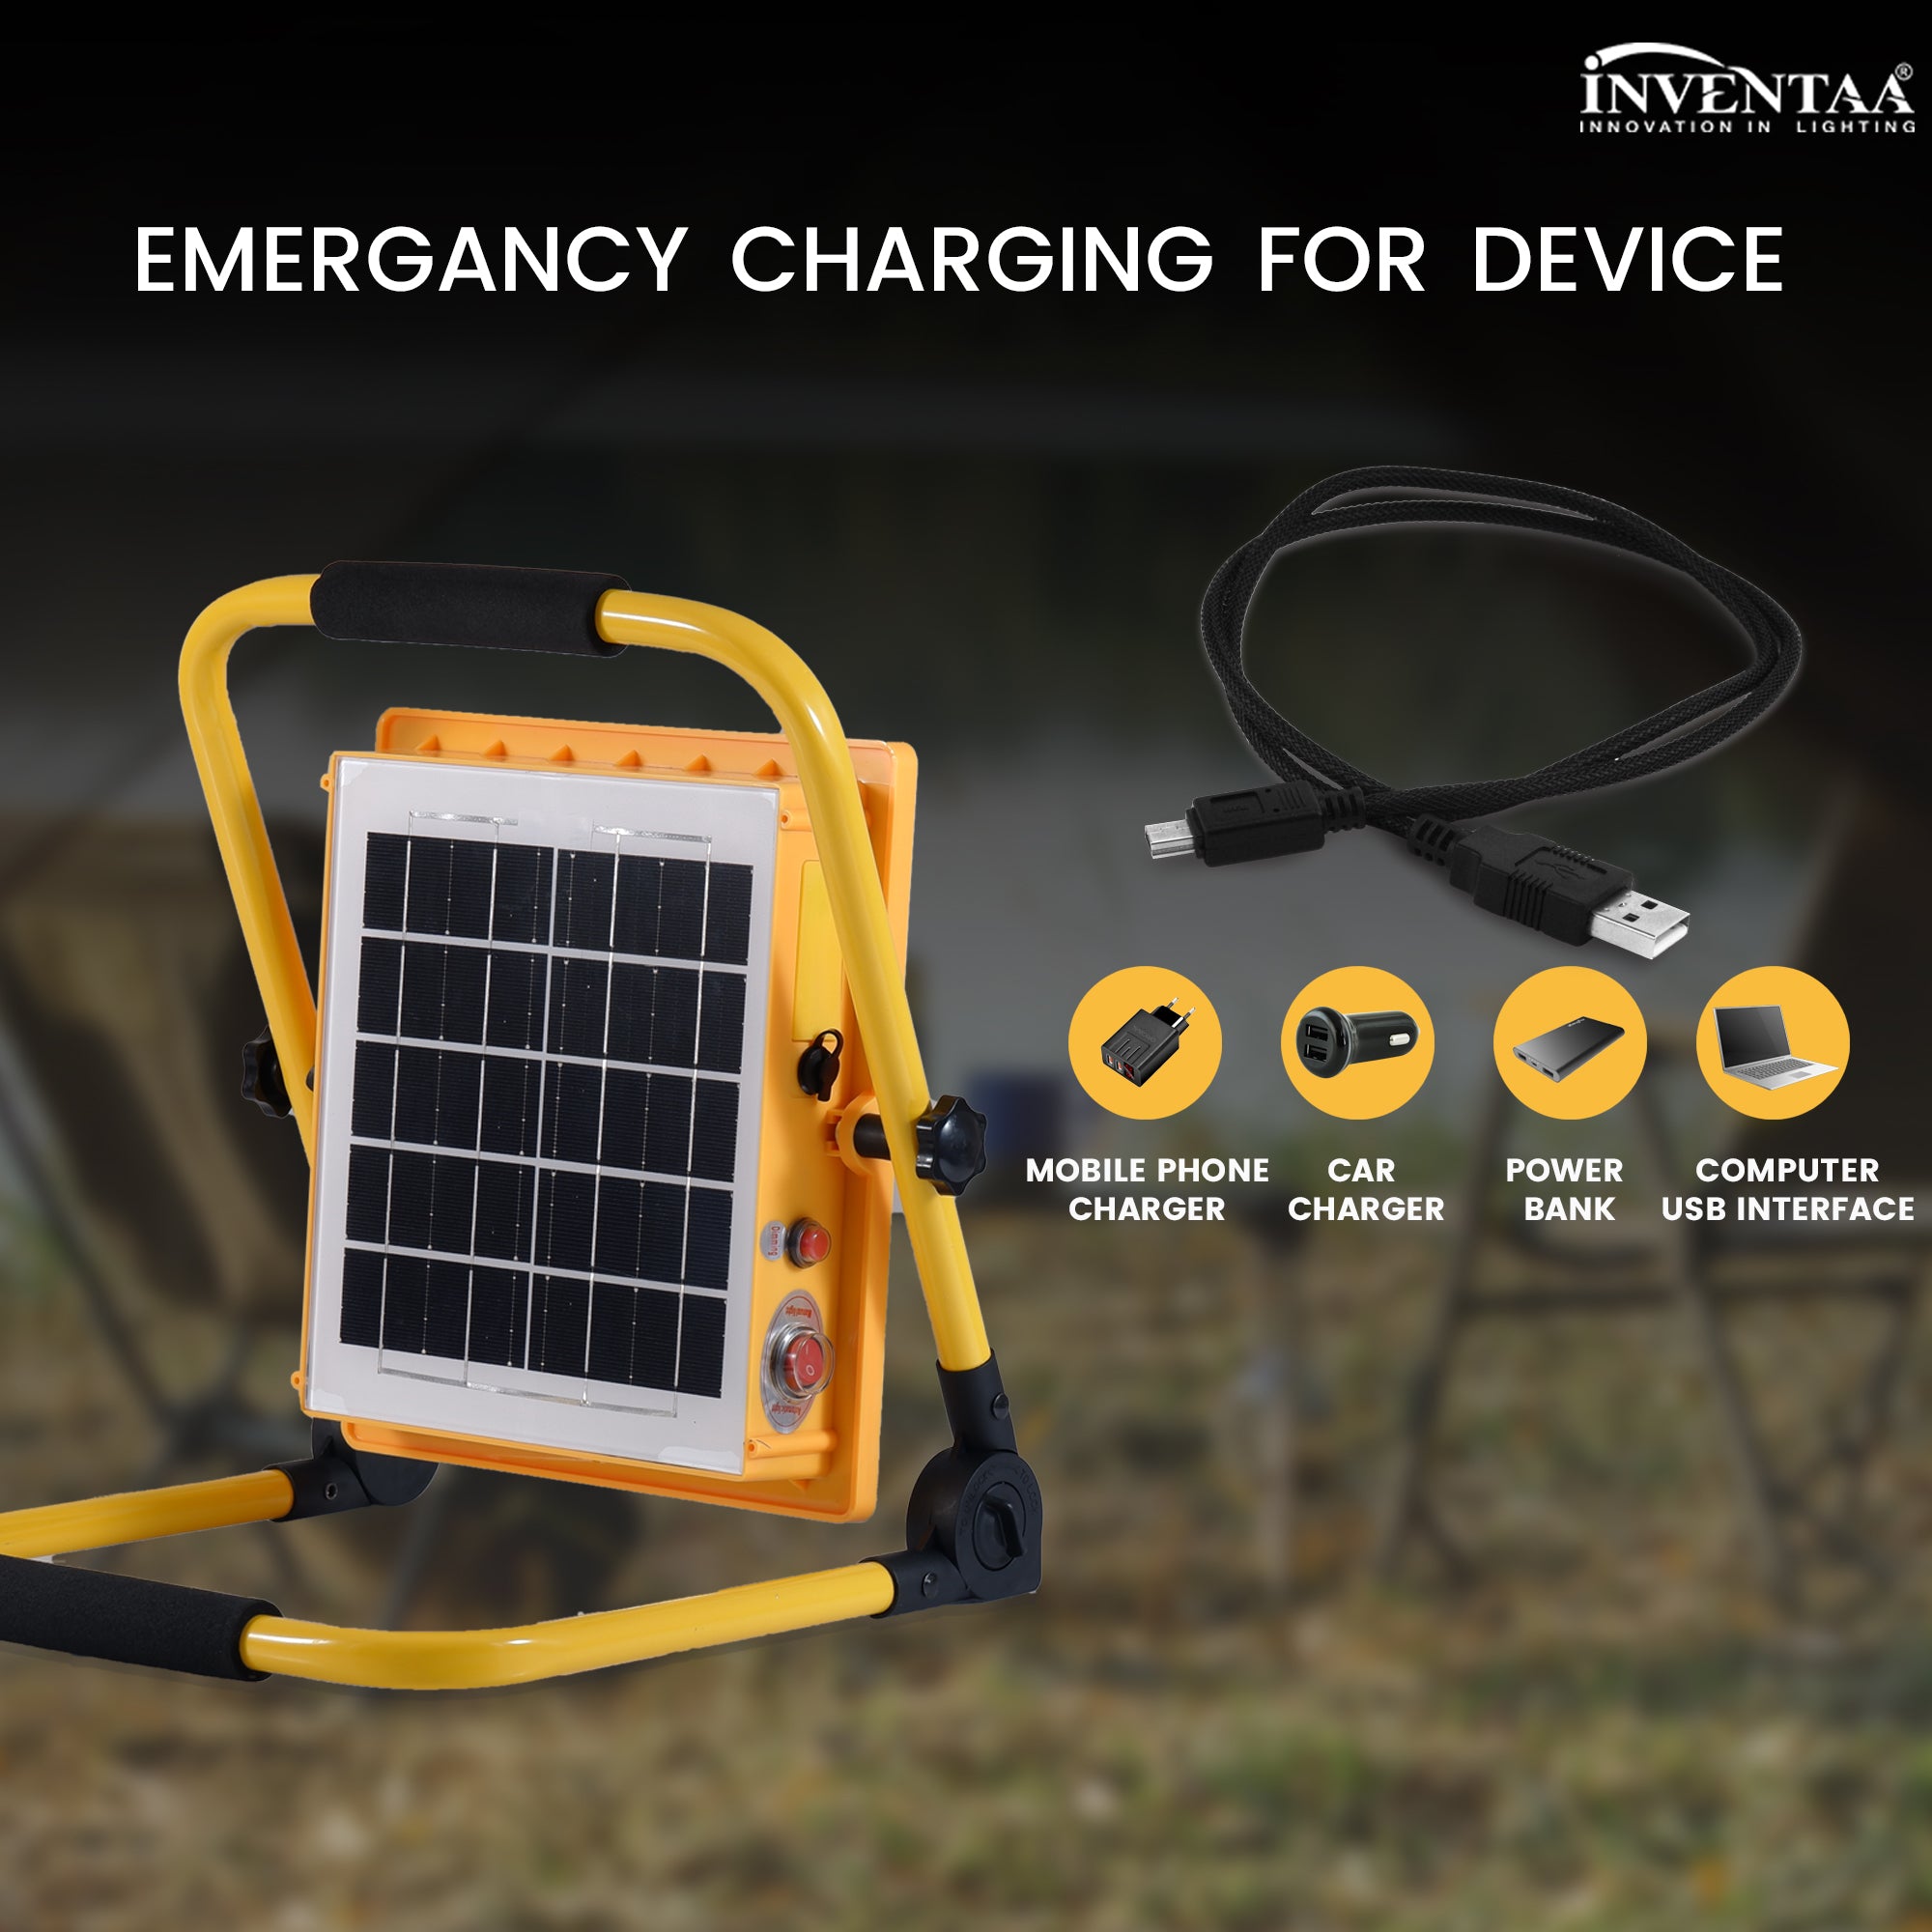 Stamina LED Solar Emergency Flood Light For Emergency Charging For Devices